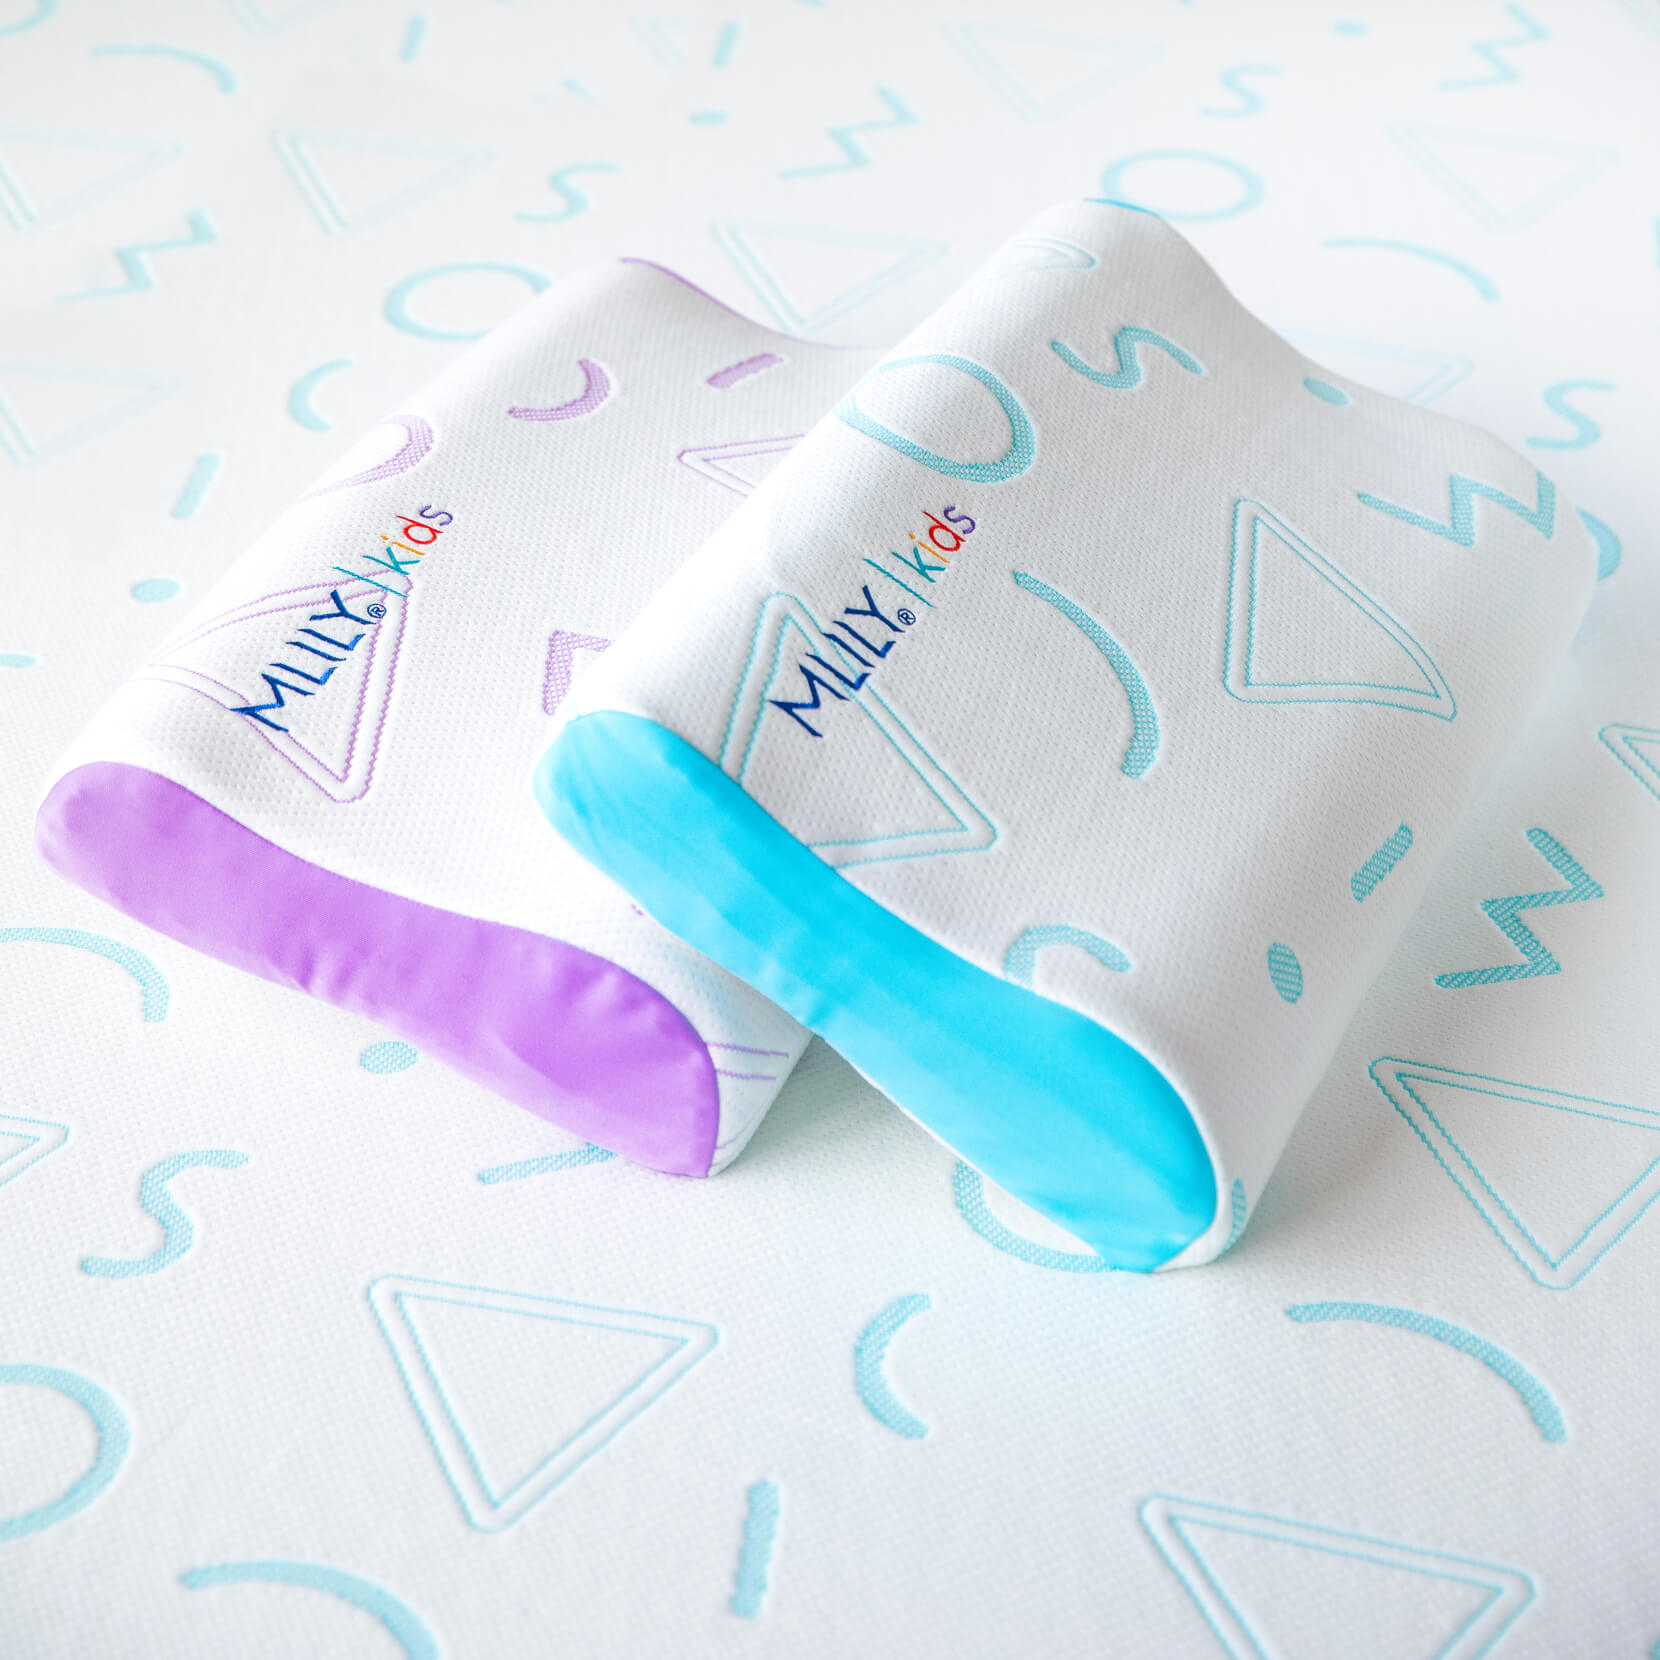 A stacked pair of white Jama pillows made of contoured memory foam, one features purple accents, and the other has teal accents.